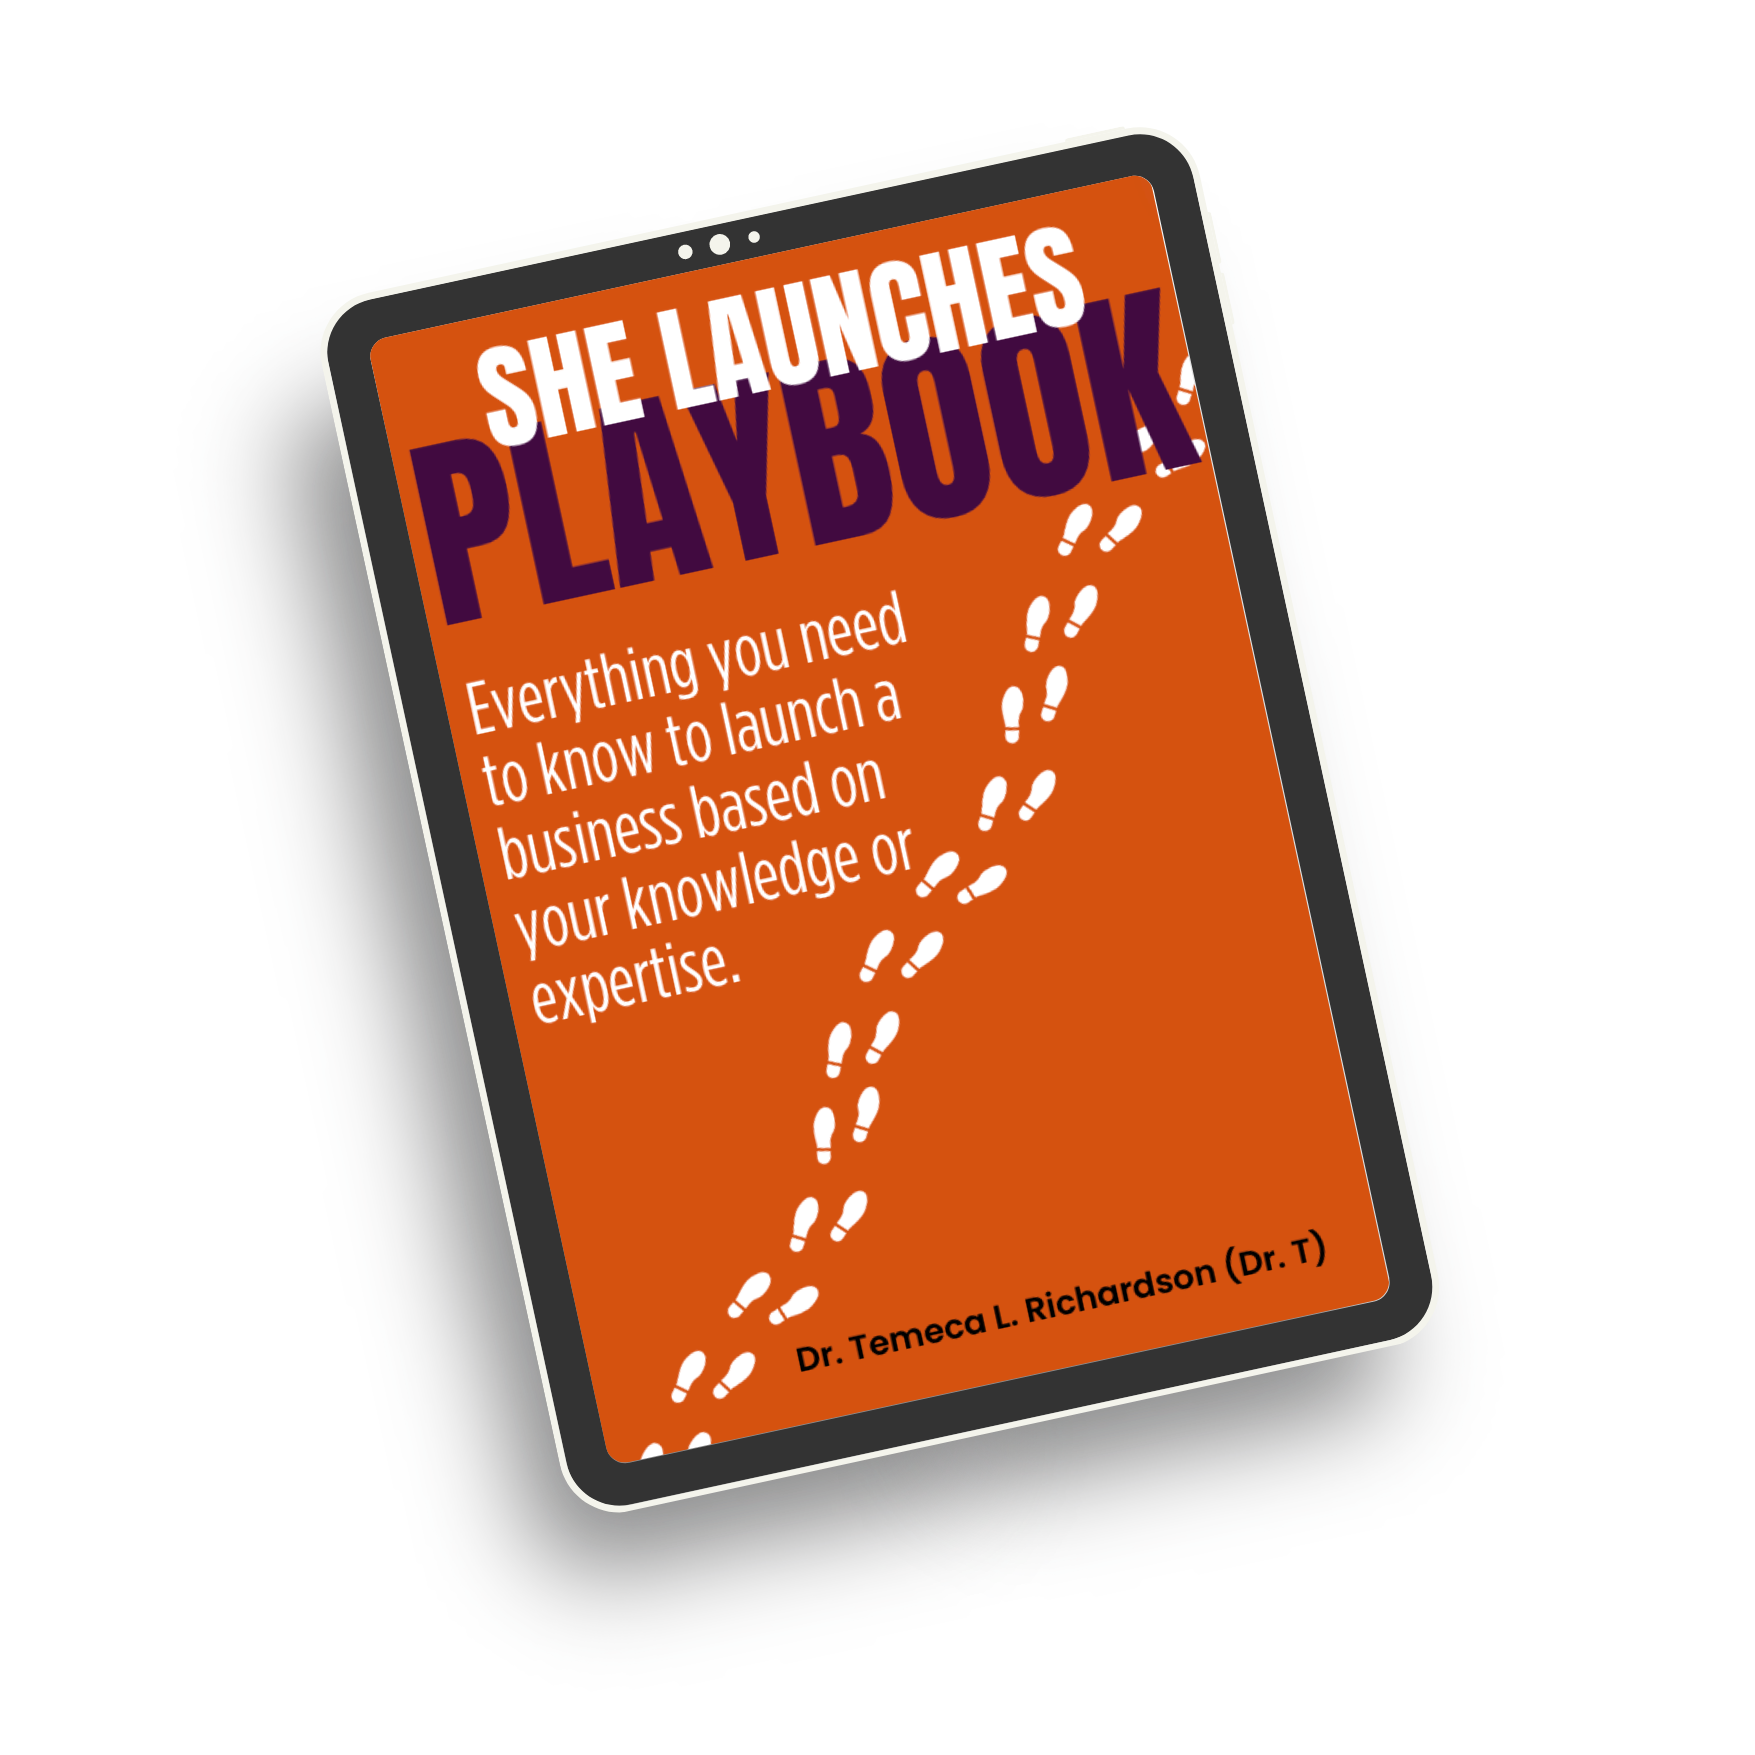 SHE Launches Playbook. Learn how to launch or start your online business.